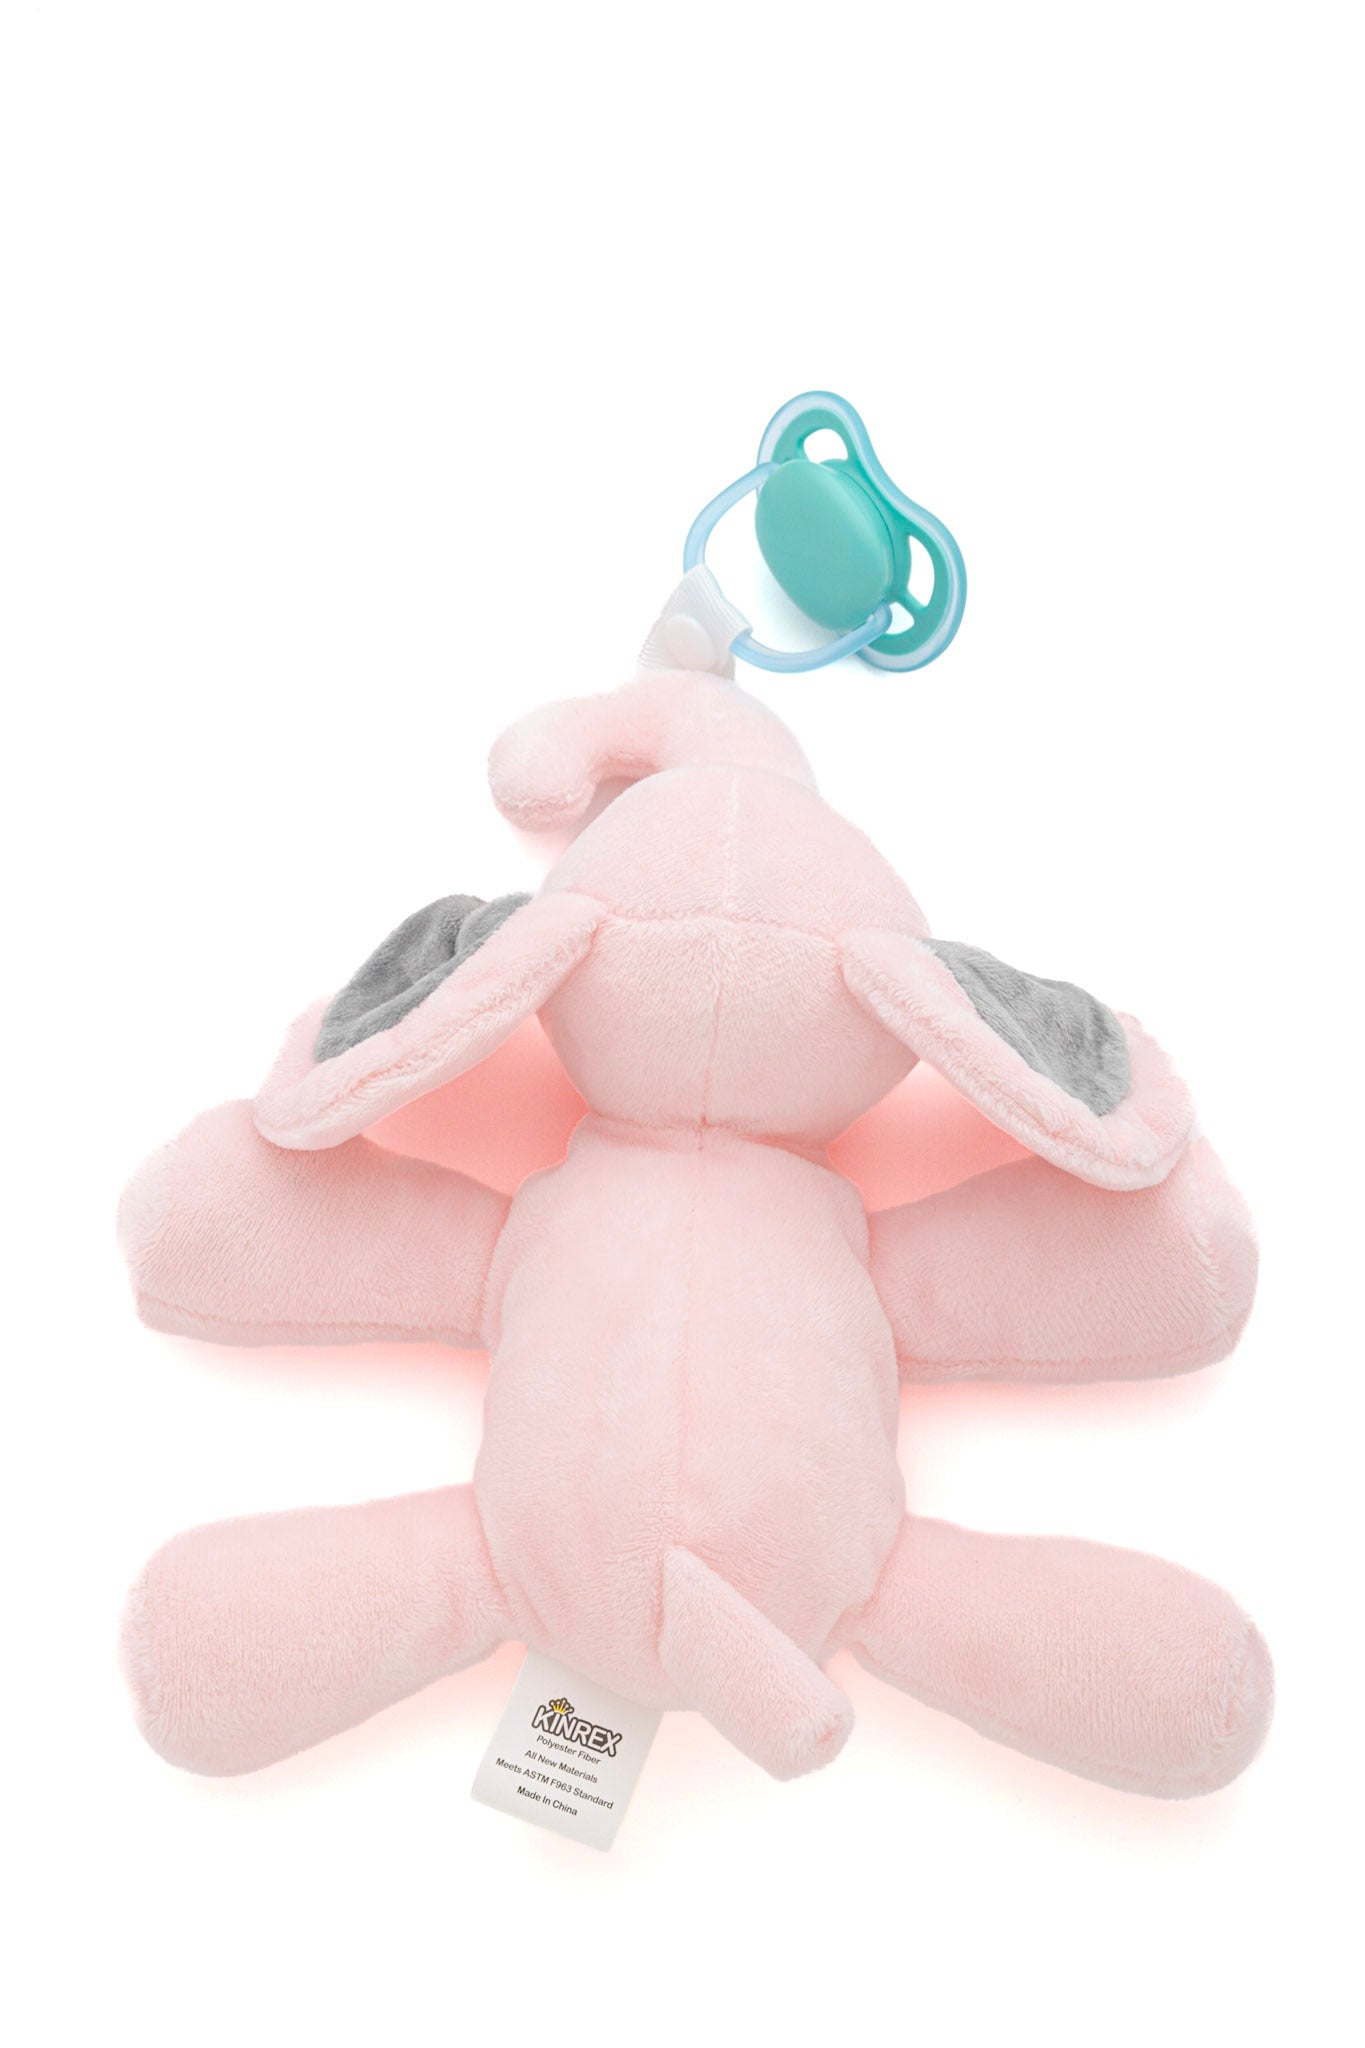 KINREX Baby Pacifier Holder Soft Elephant Stuffed Animal with Pacifiers  Binky Clip for Newborn Babies Boys & Girls Preemie Infant Pink Measures 18  cm. / 7.09